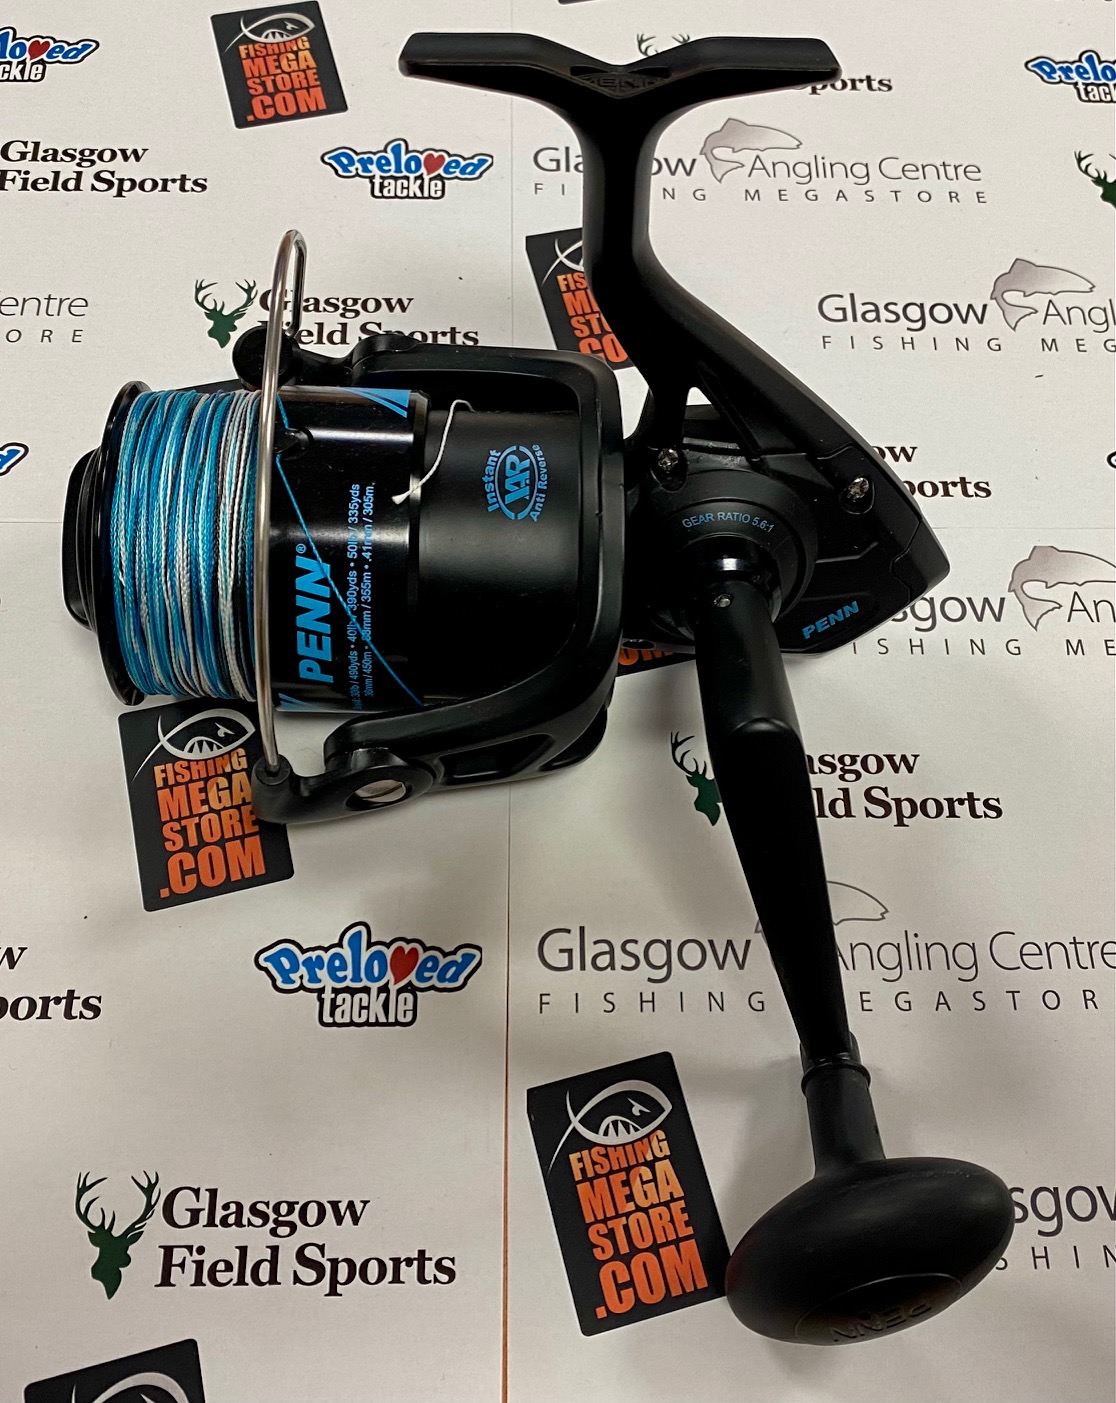 Wrath 6000 Spinning Reel - WRTH6000 (no box) - Excellent